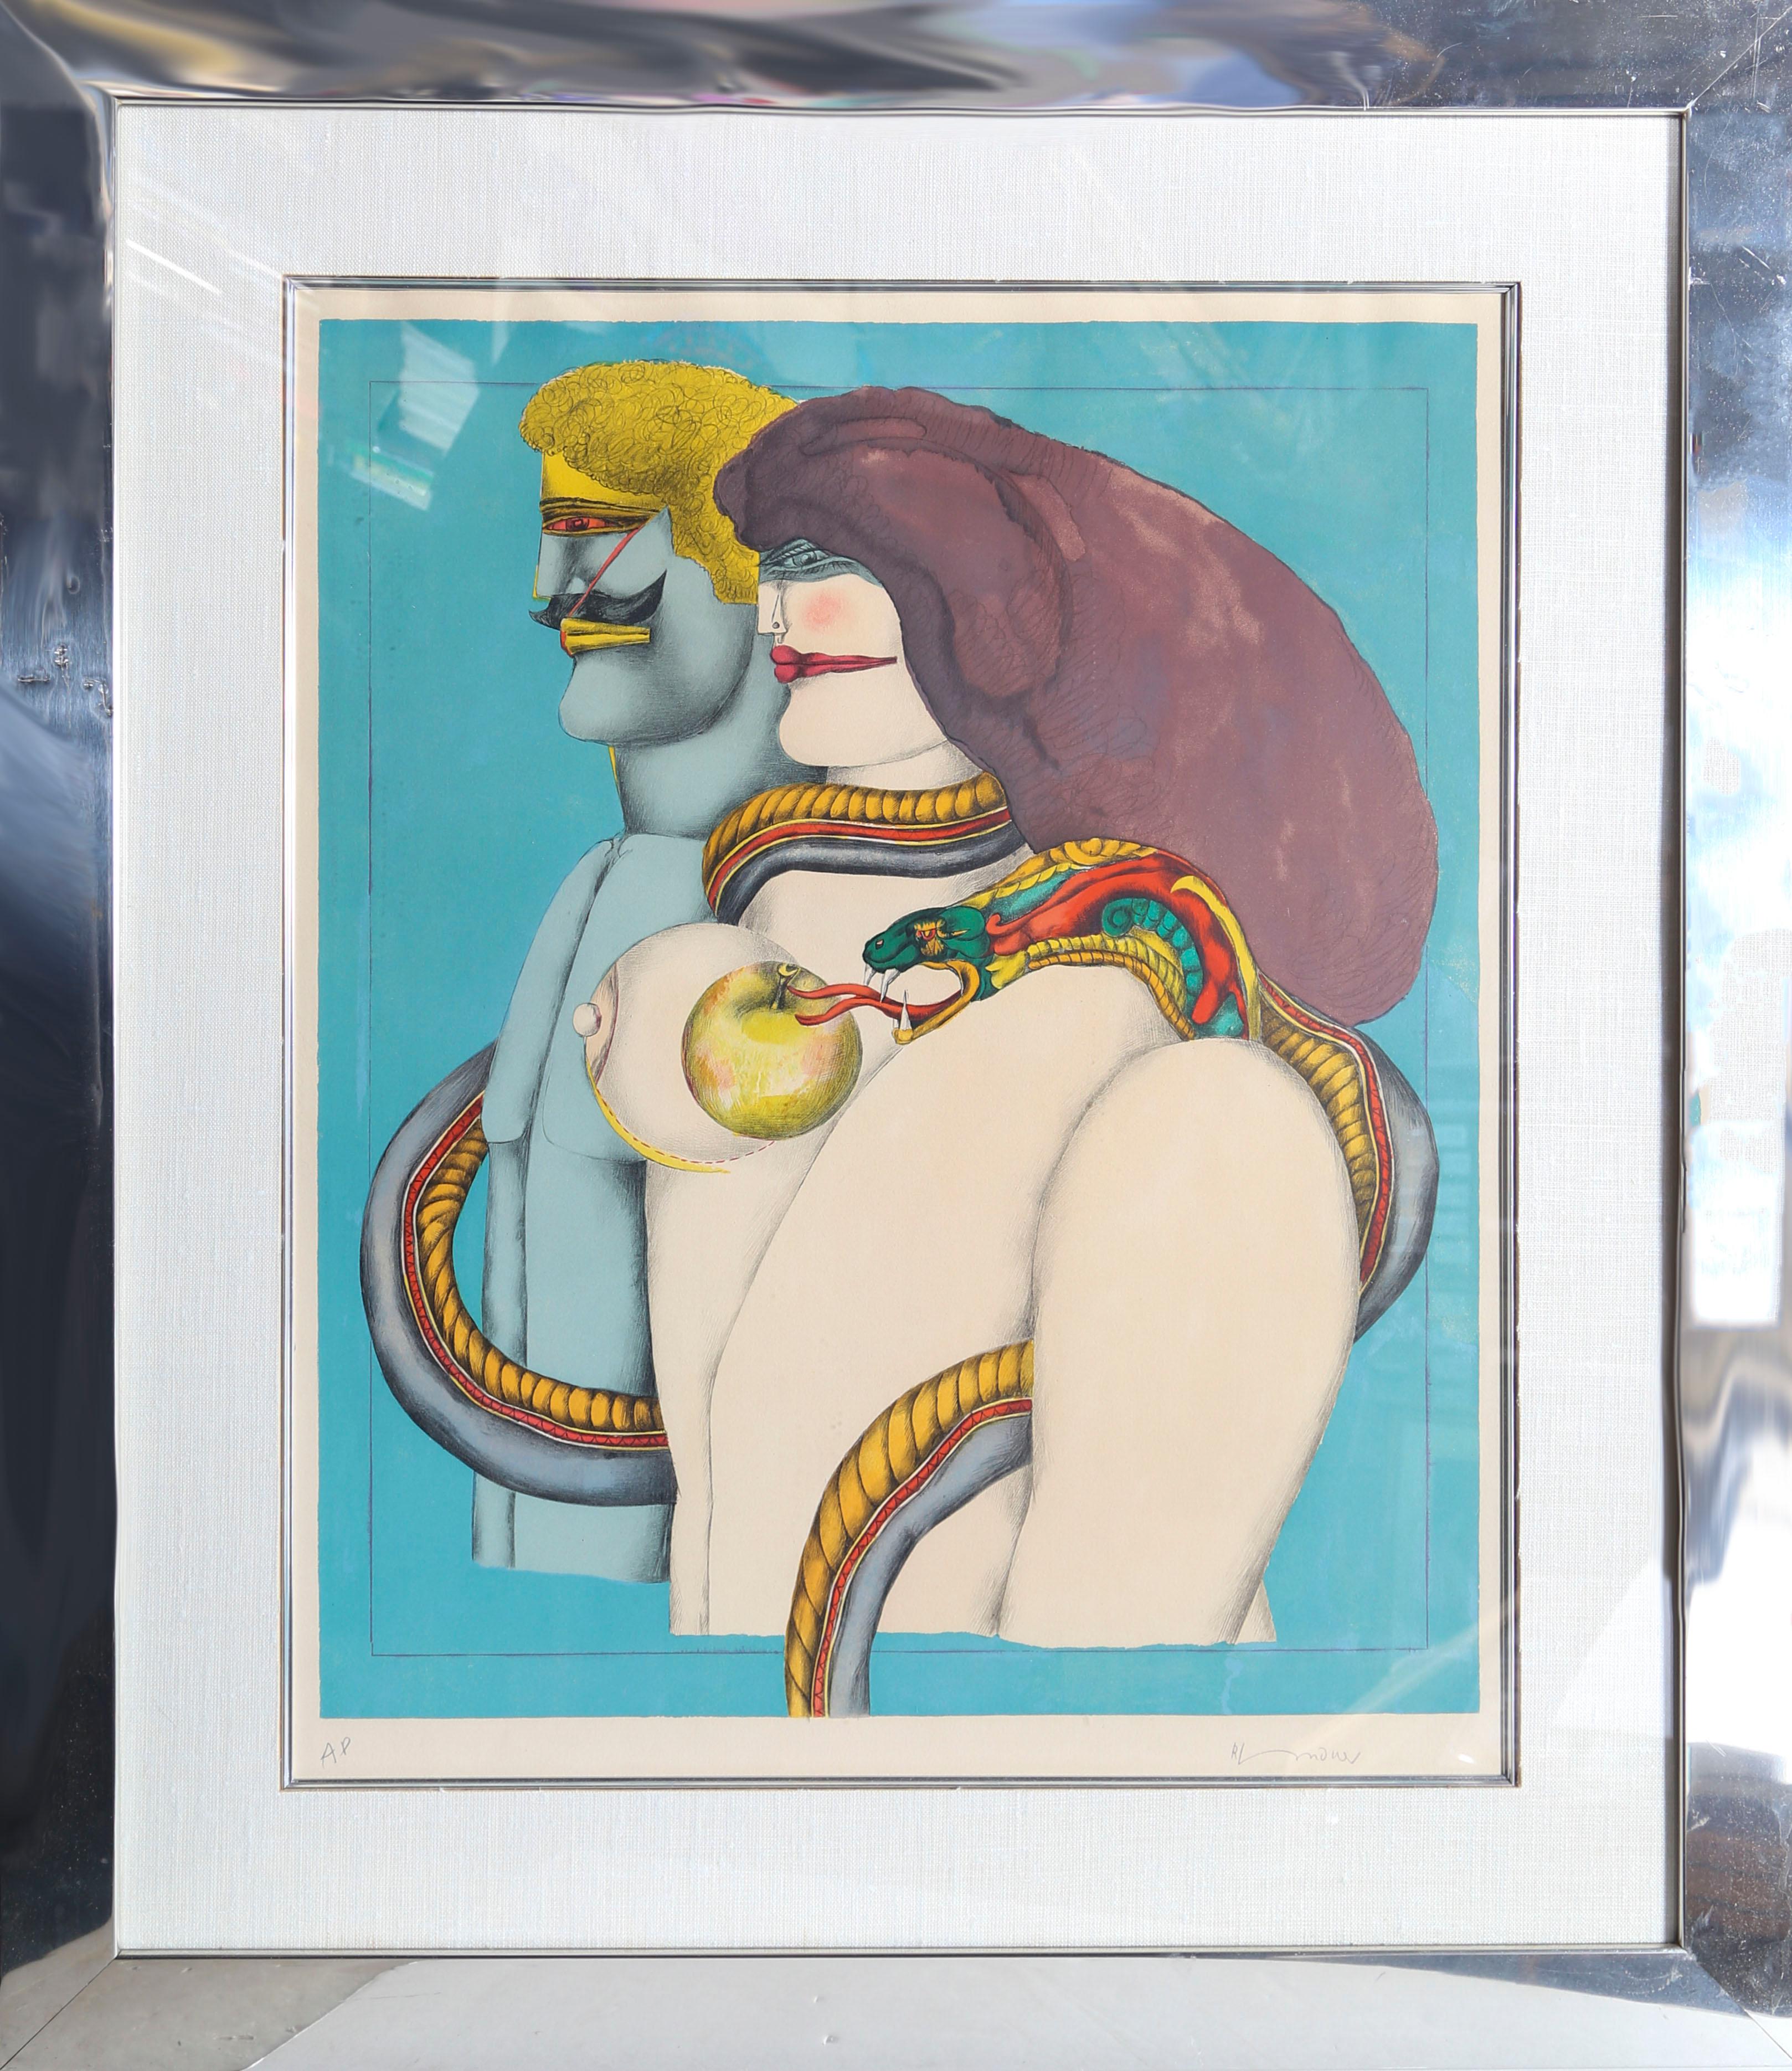 A depiction of Adam and Eve, at the beginning of creation. The snake with an apple can be seen slithering over Eve’s shoulder, enticing her to take a bite.

How it All Began
Richard Lindner, German/American (1901–1978)
Portfolio: After Noon
Date: